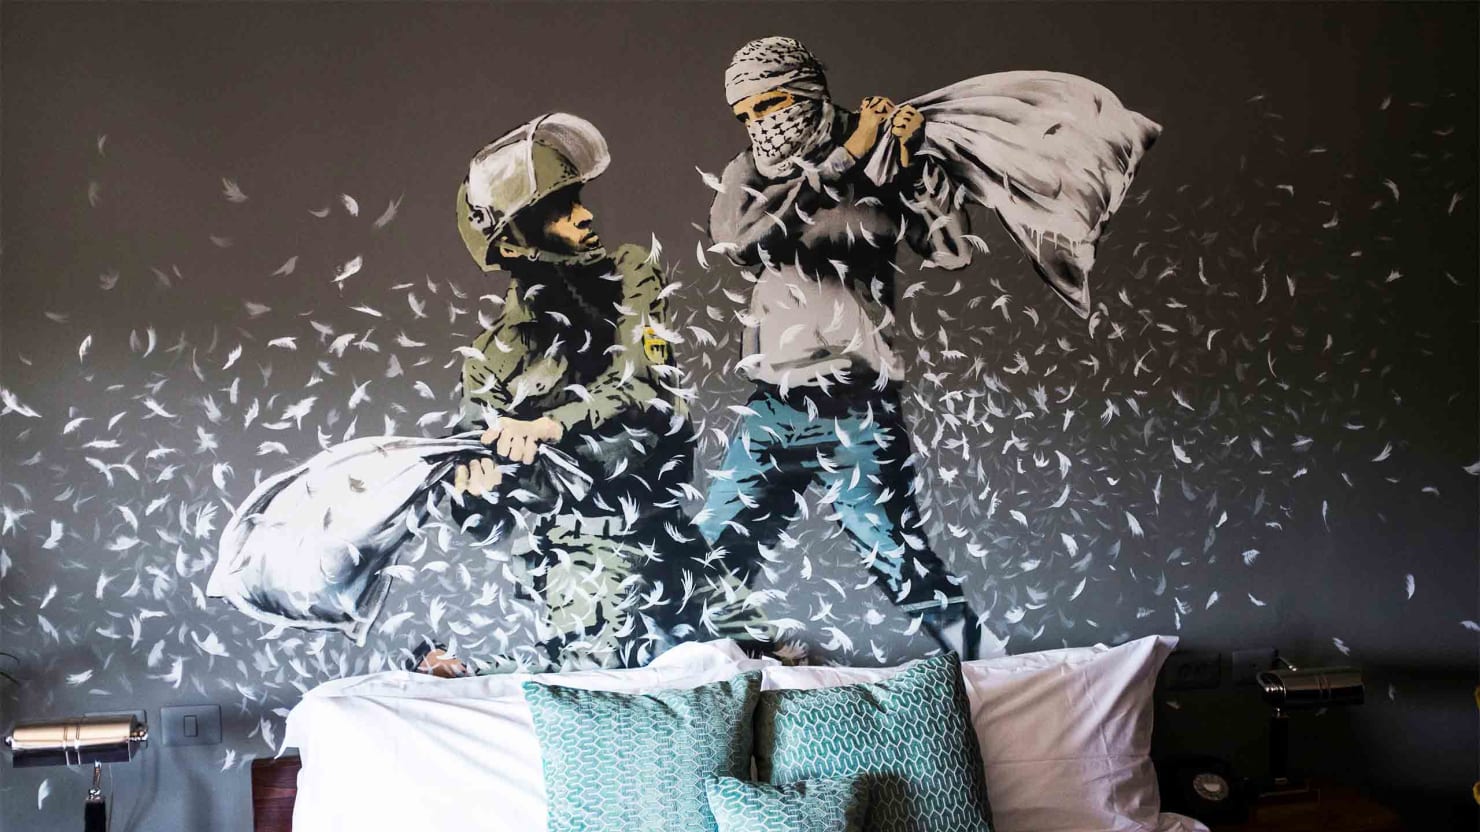 Is British Street Artist Banksy Really Four People?